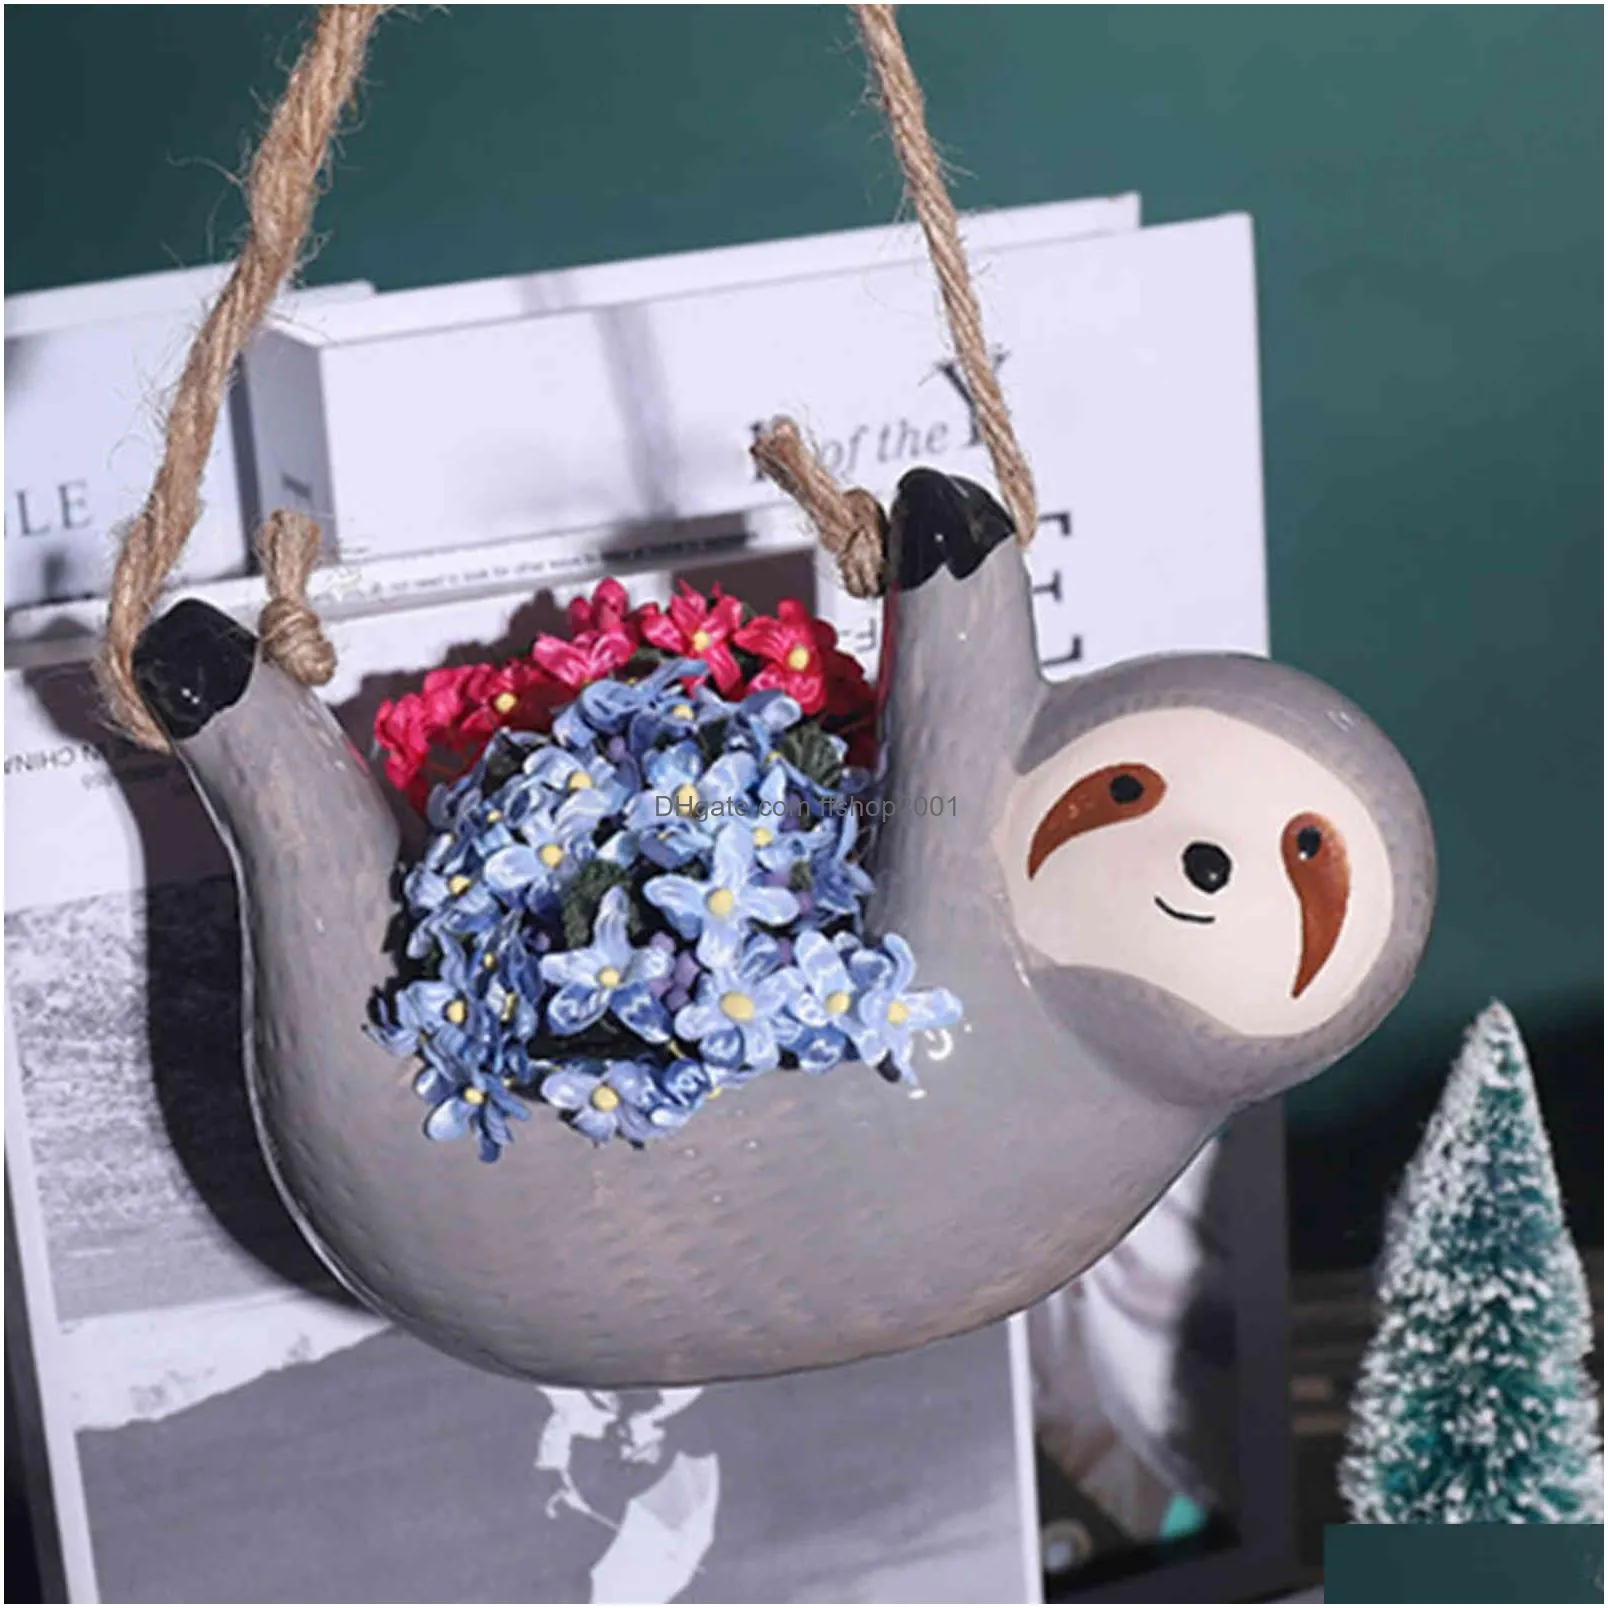 ceramic sloth hanging succulent planter cute animal small plant pot for cactus air plants flowers herbs garden decoration y03148403305